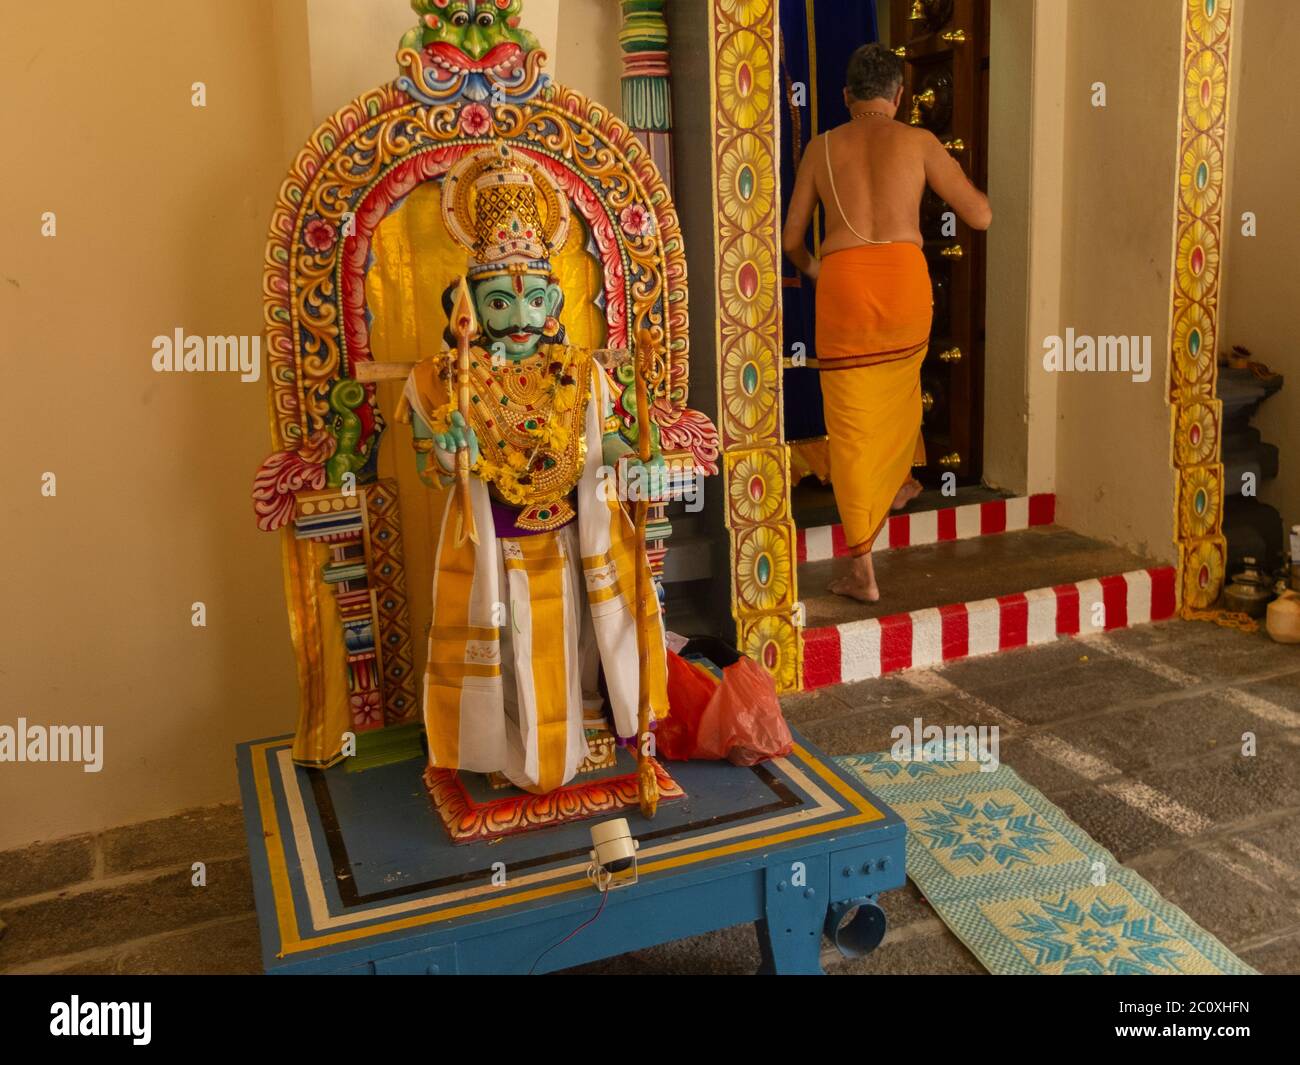 Hindu religious officiant and murti (deity or ceremonial statues). Sri Mariamman Temple. Chinatown. Singapore Stock Photo